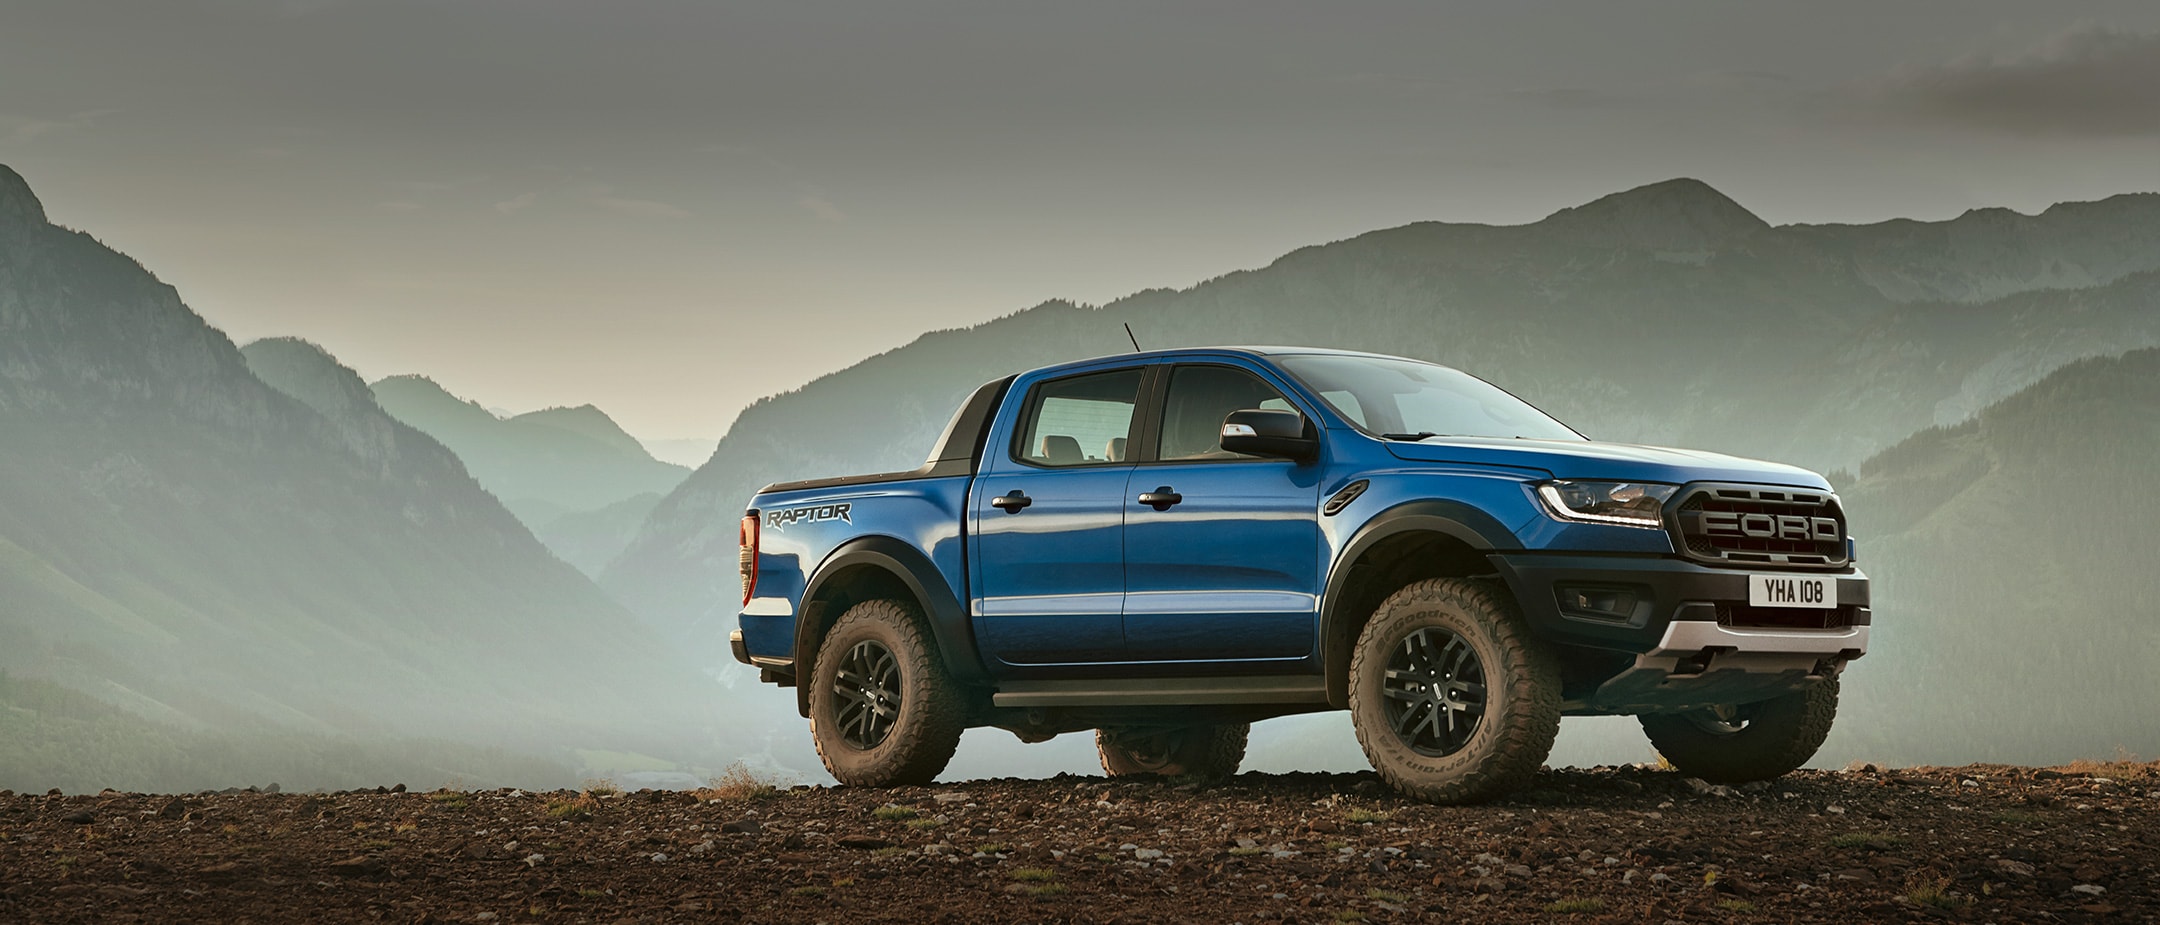 Ford Ranger Raptor parked in the middle of mountains